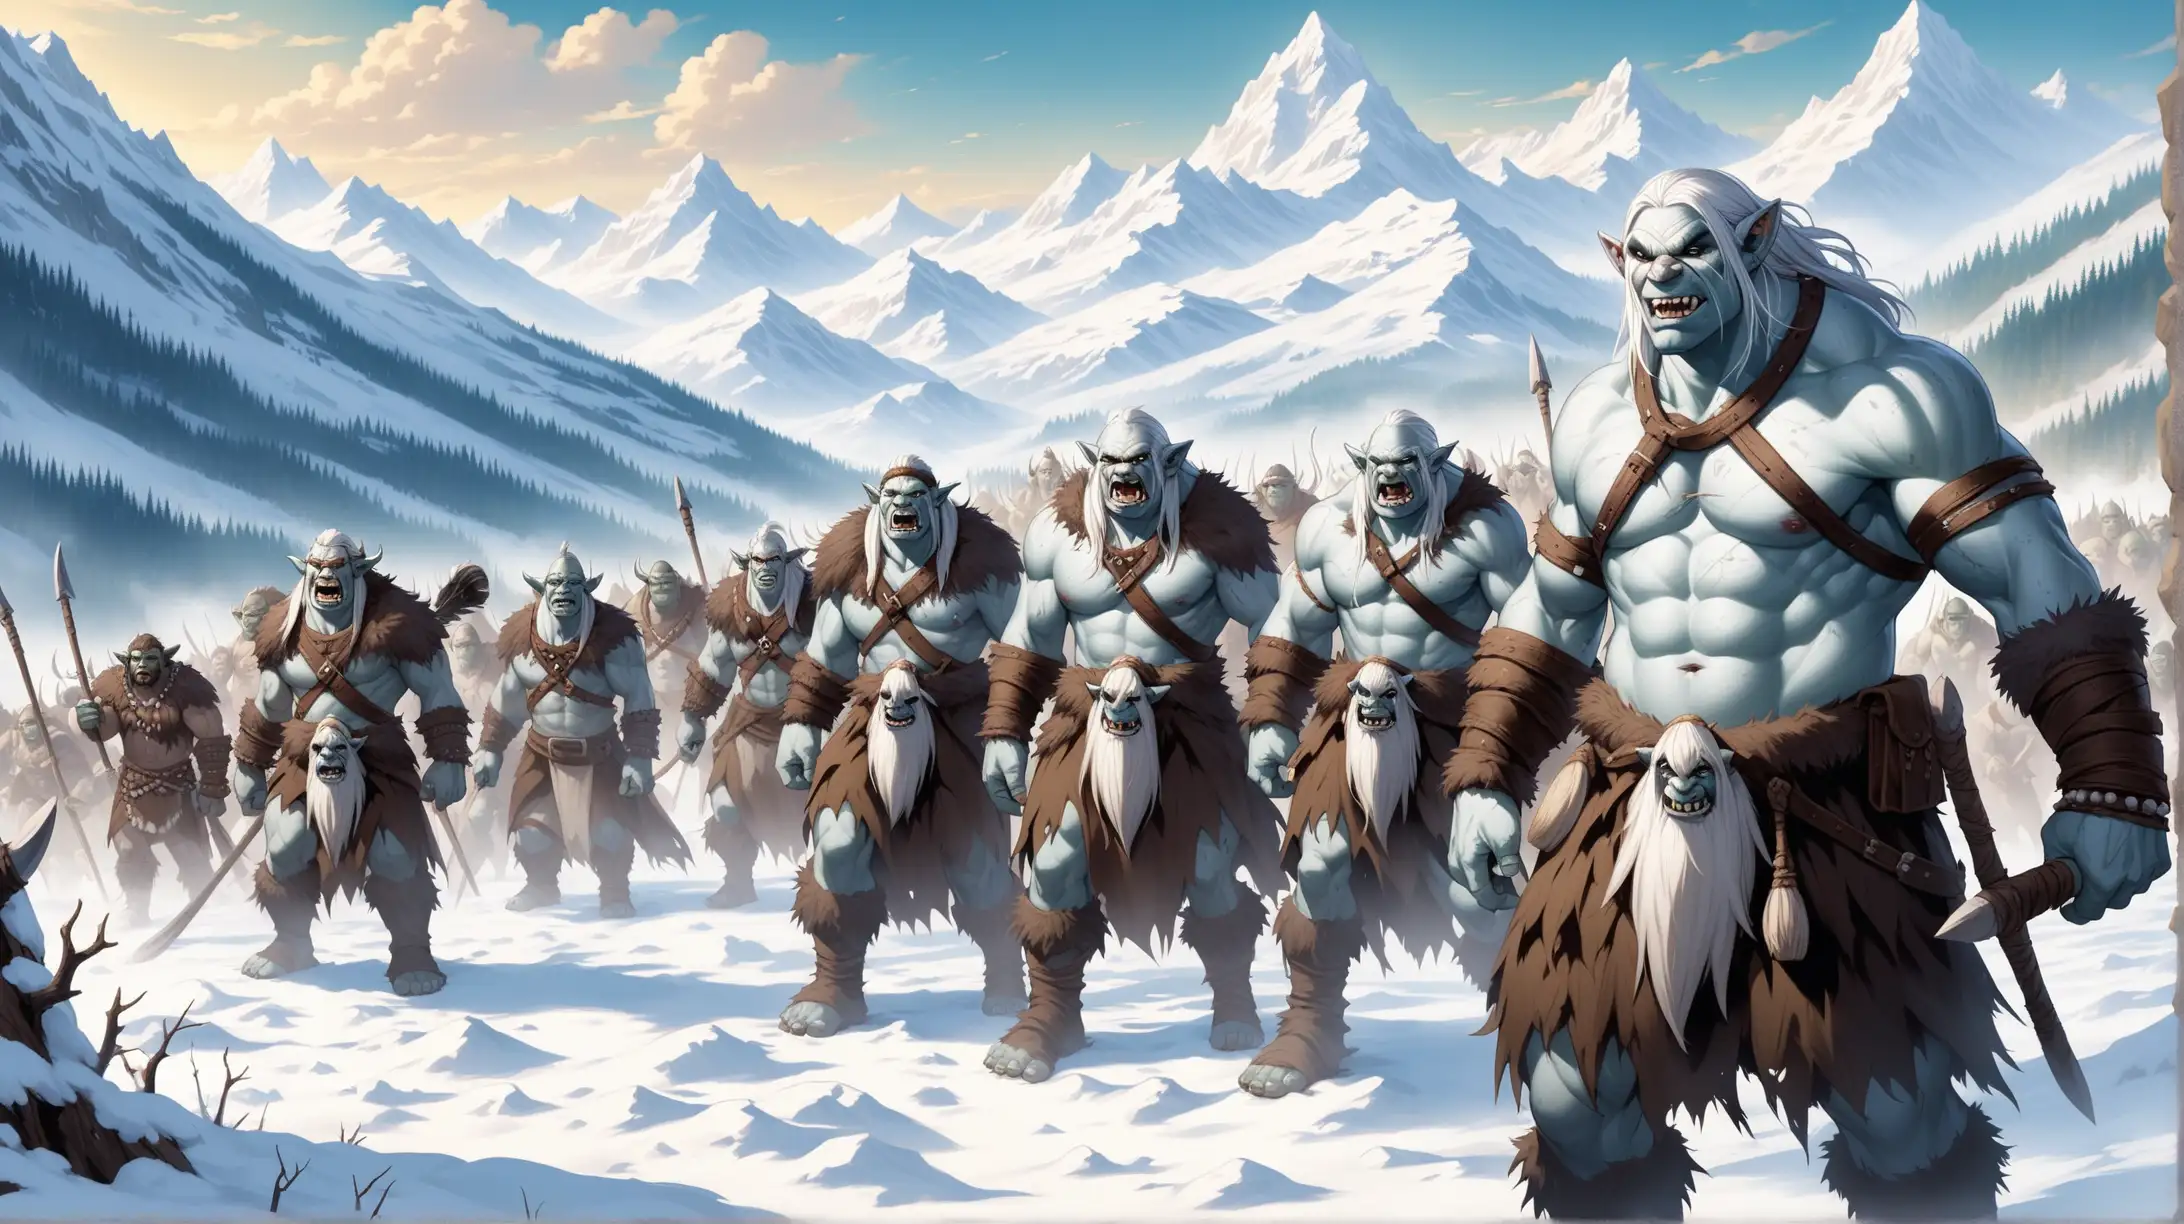 tribe of pearly white orcs with chalk white skin, barbarians and shamans, women and men, snow white mountains, Medieval fantasy